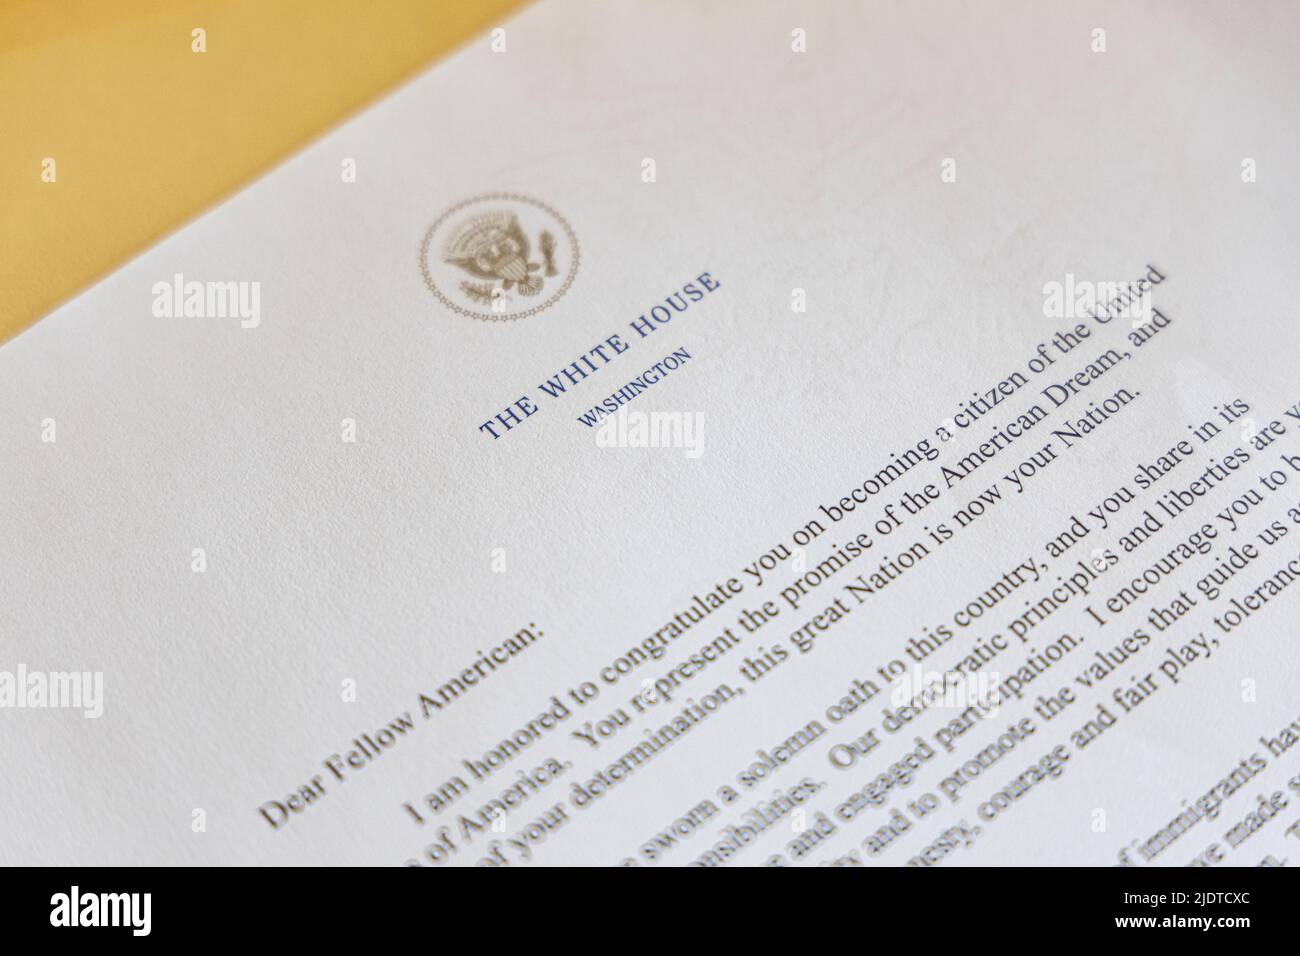 US CITIZENSHIP WELCOME LETTER FROM THE PRESIDENT, WASHINGTON DC, USA Stock Photo